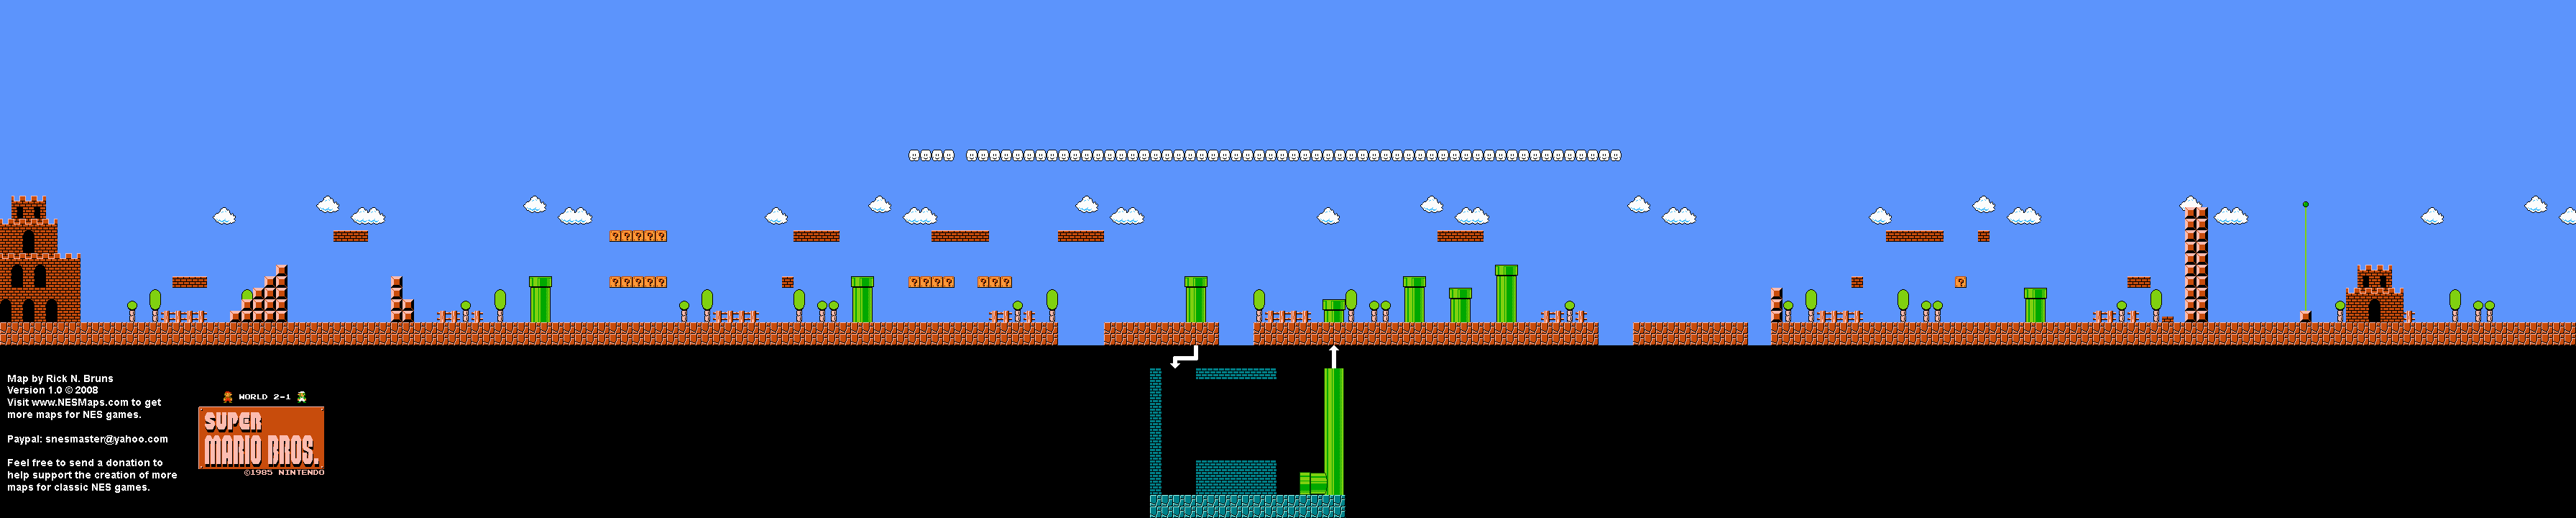 Super Mario Brothers - World 2-1 Nintendo NES Background Only Map